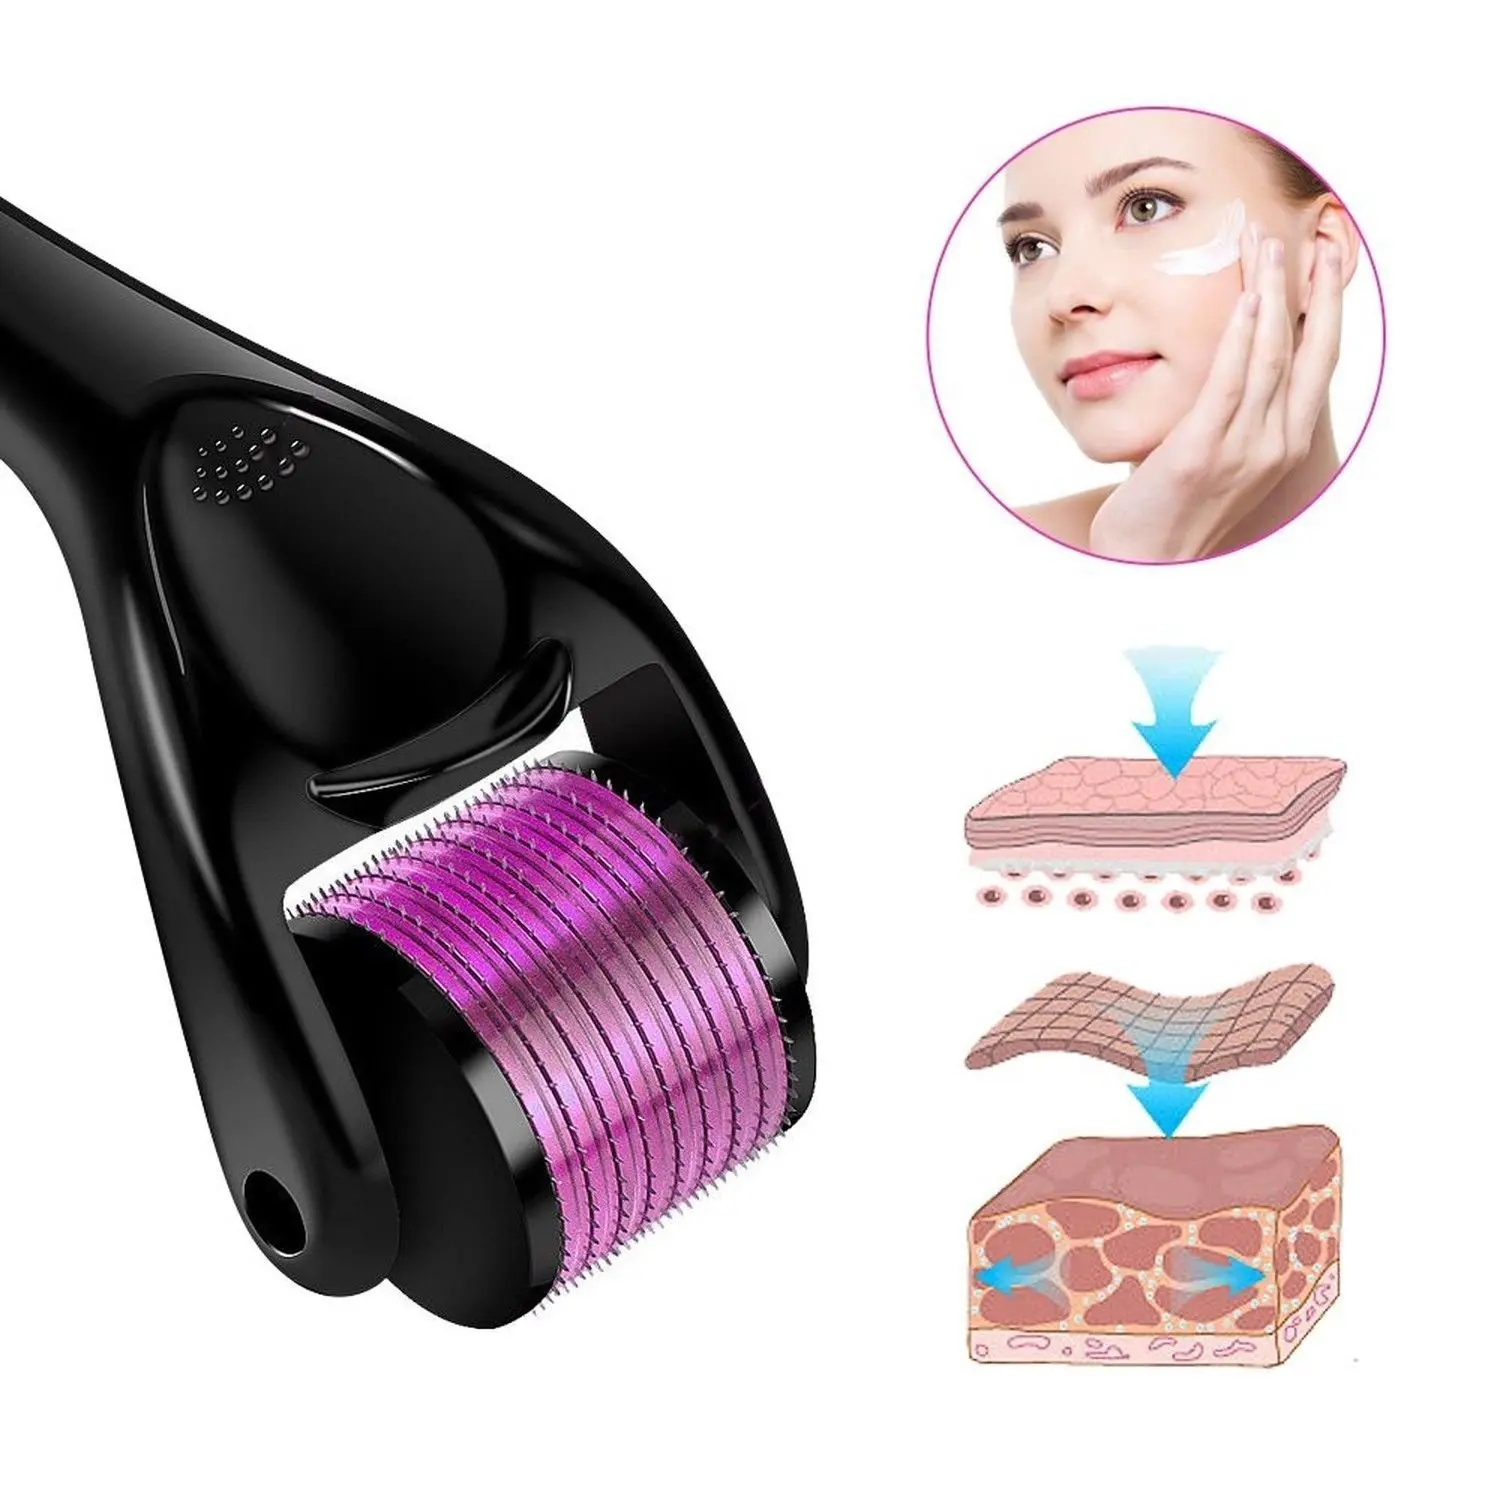 540 Pins derma roller stretch marks microneedling derma roller for hair loss treatment